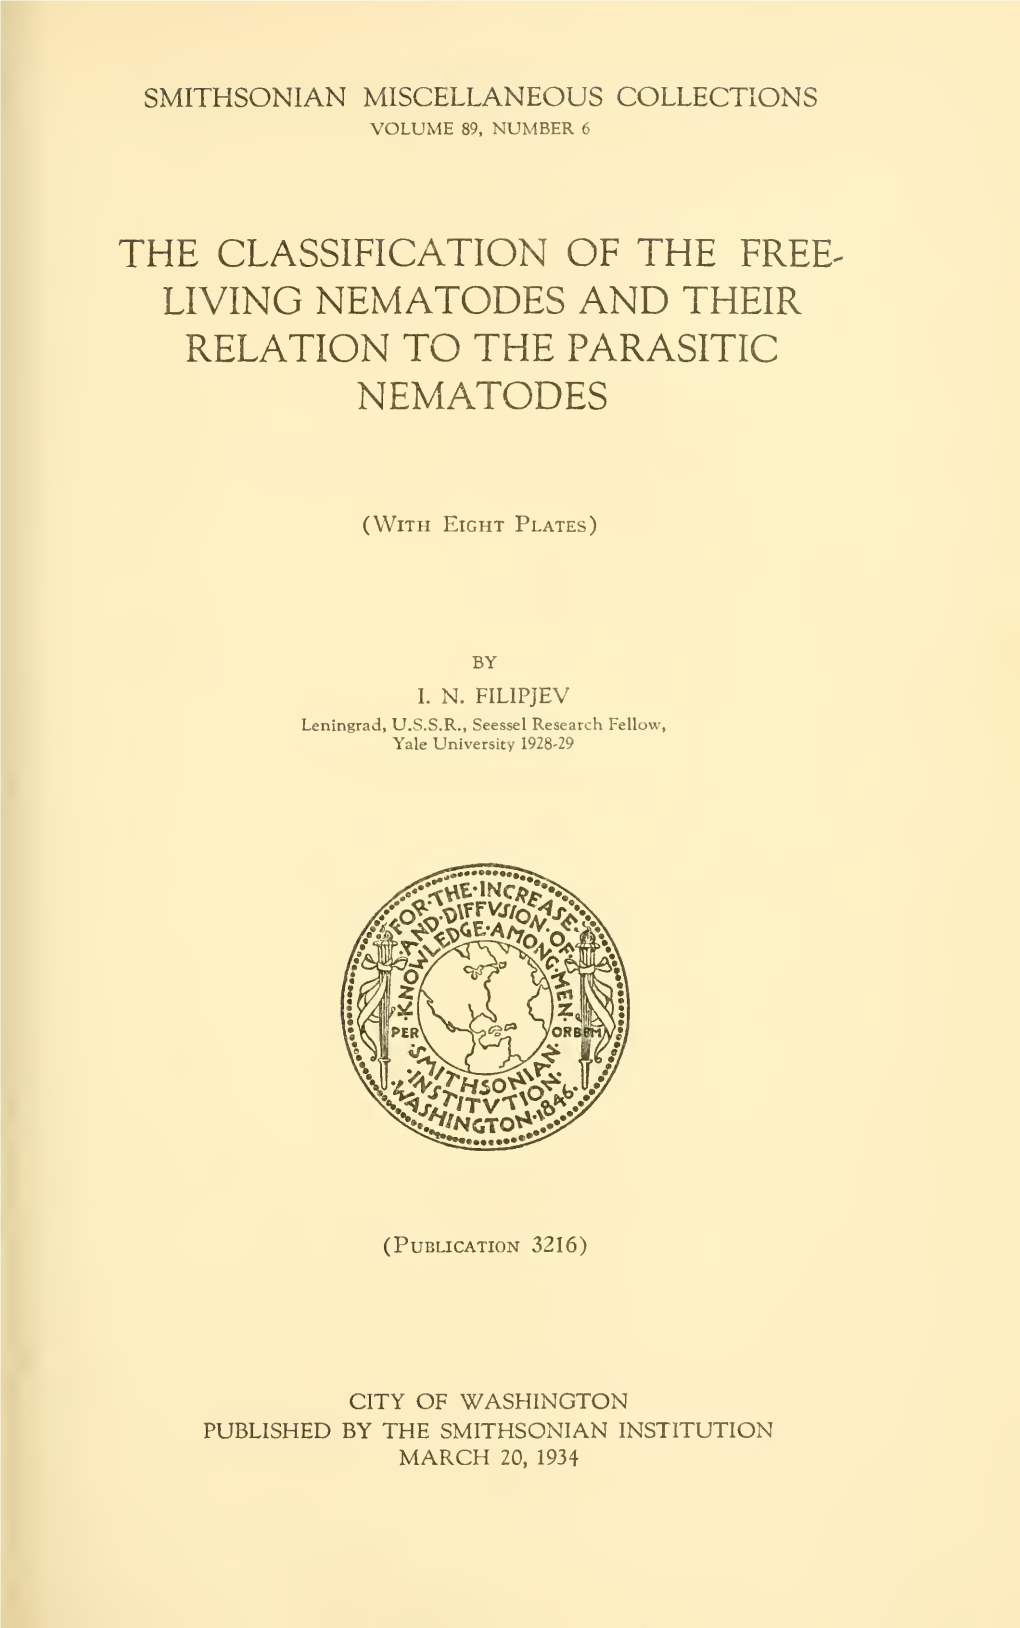 The Classification of the Free- Living Nematodes and Their Relation to the Parasitic Nematodes